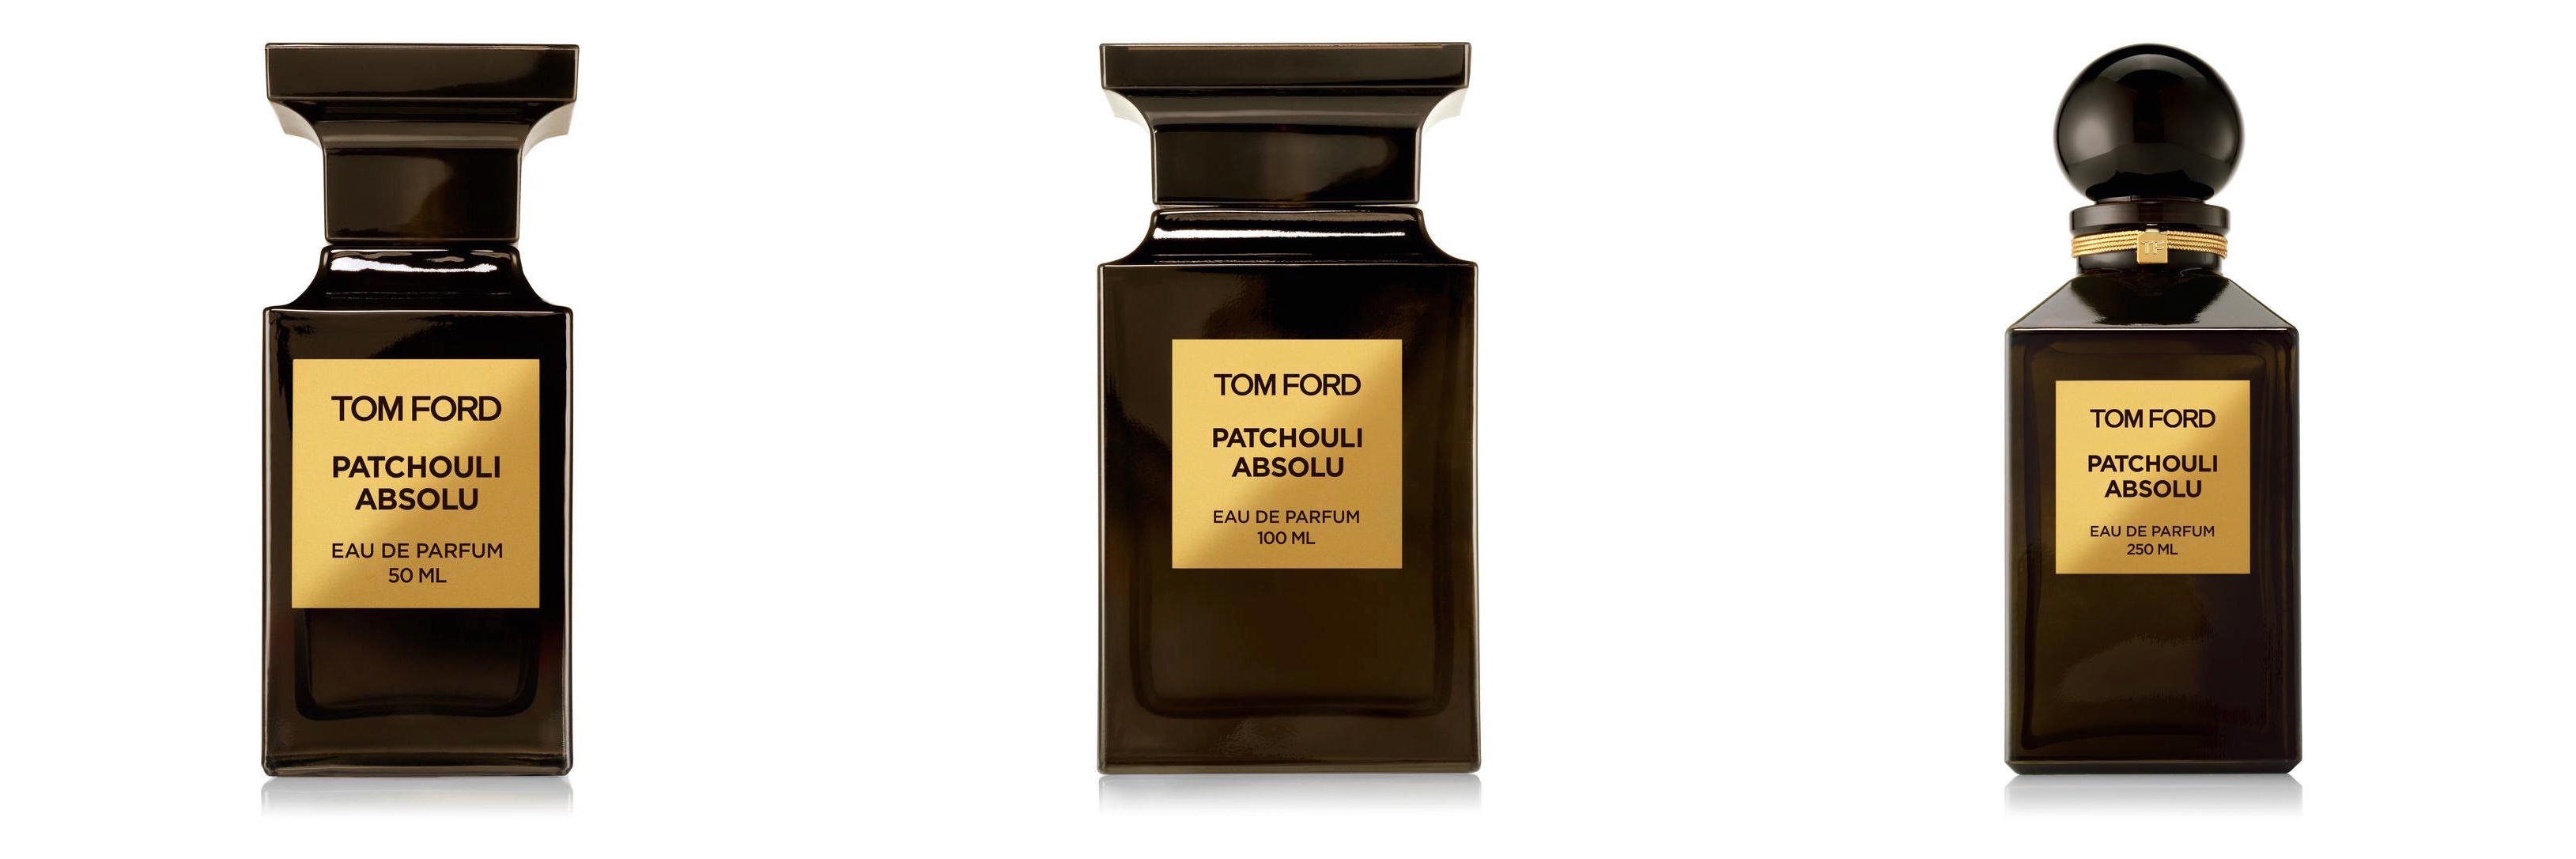 Purple patchouli tom ford notes #2